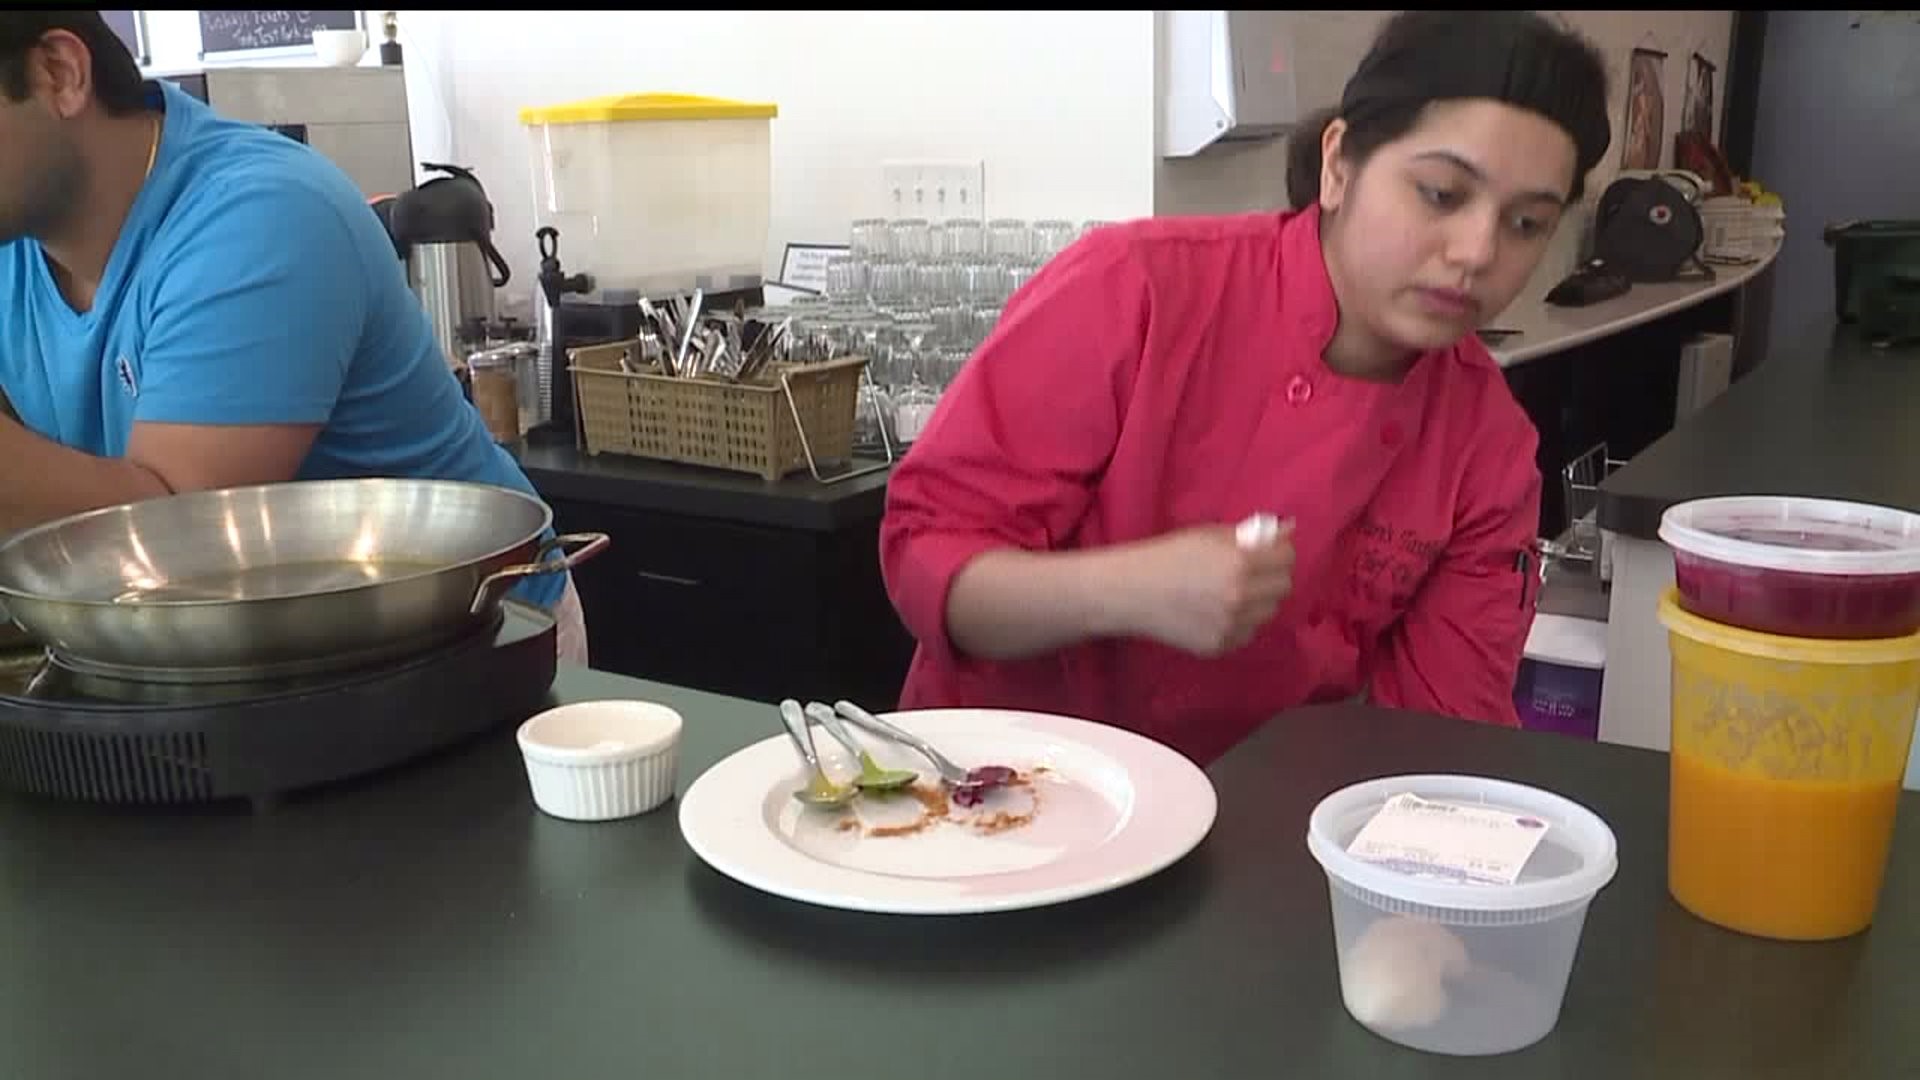 Woman gives up job to pursue cooking dream